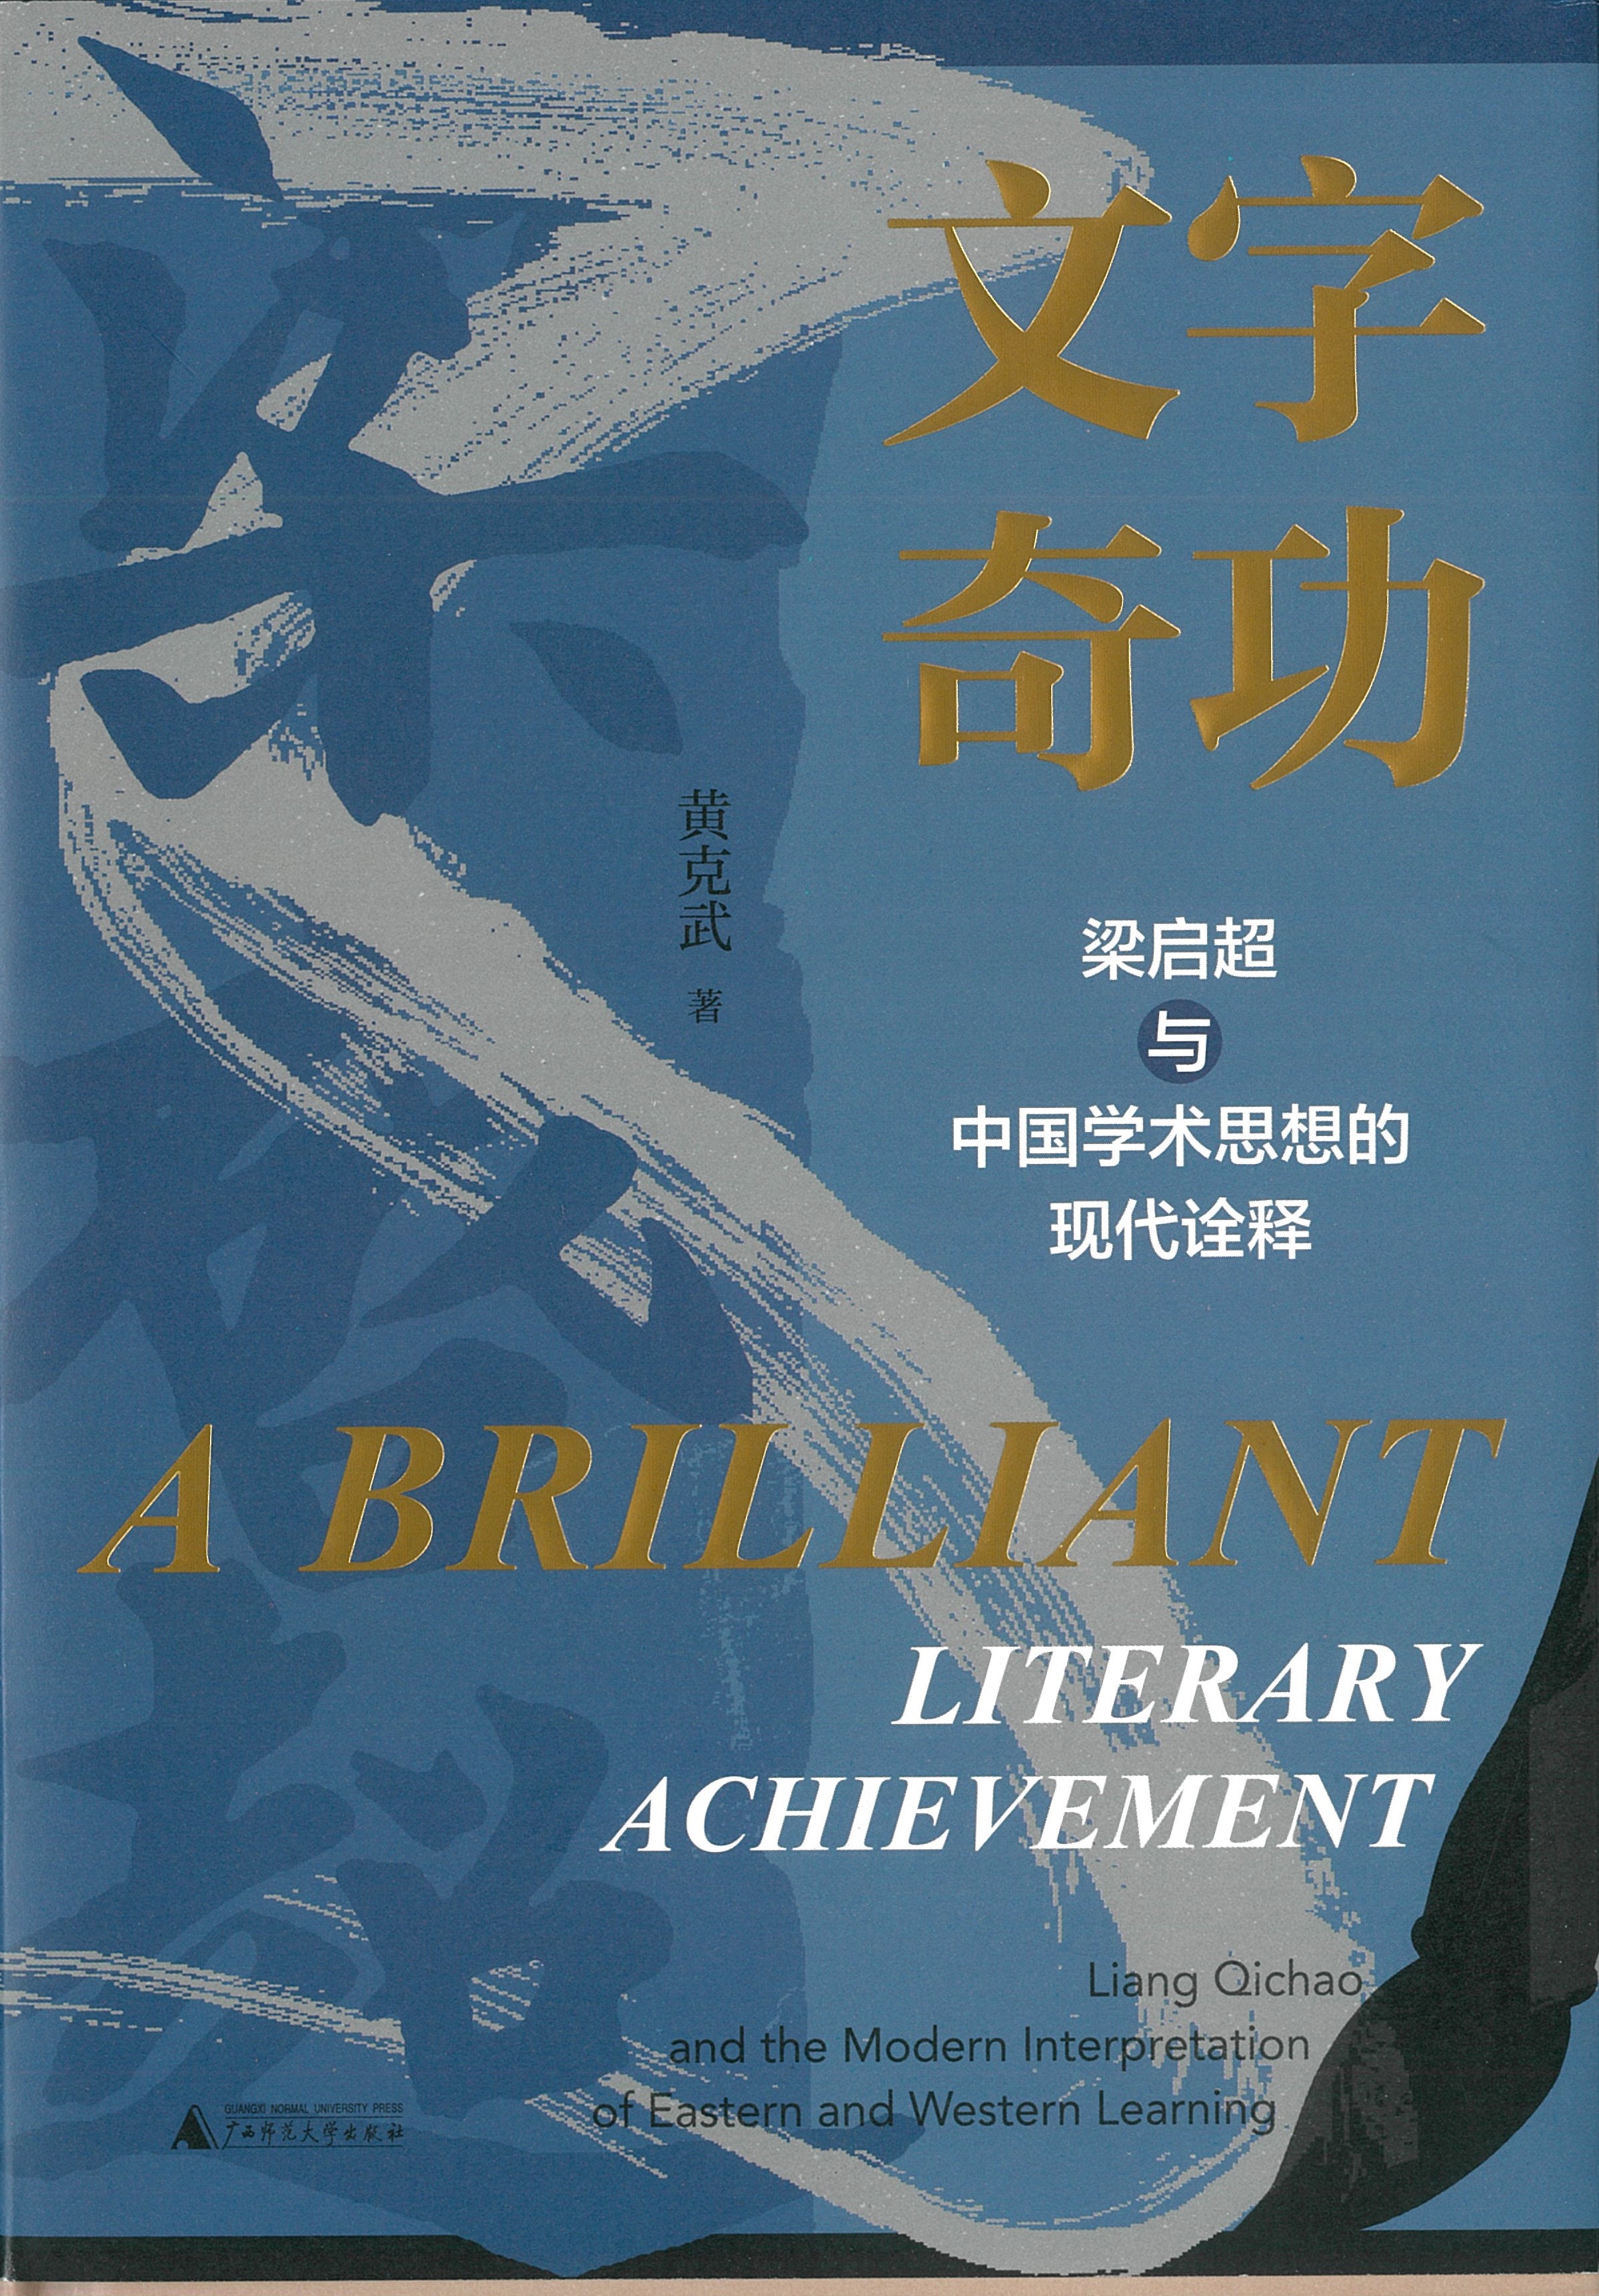 A Brilliant Literary Achievement: Liang Qichao and the Modern Interpretation of Eastern and Western Learning